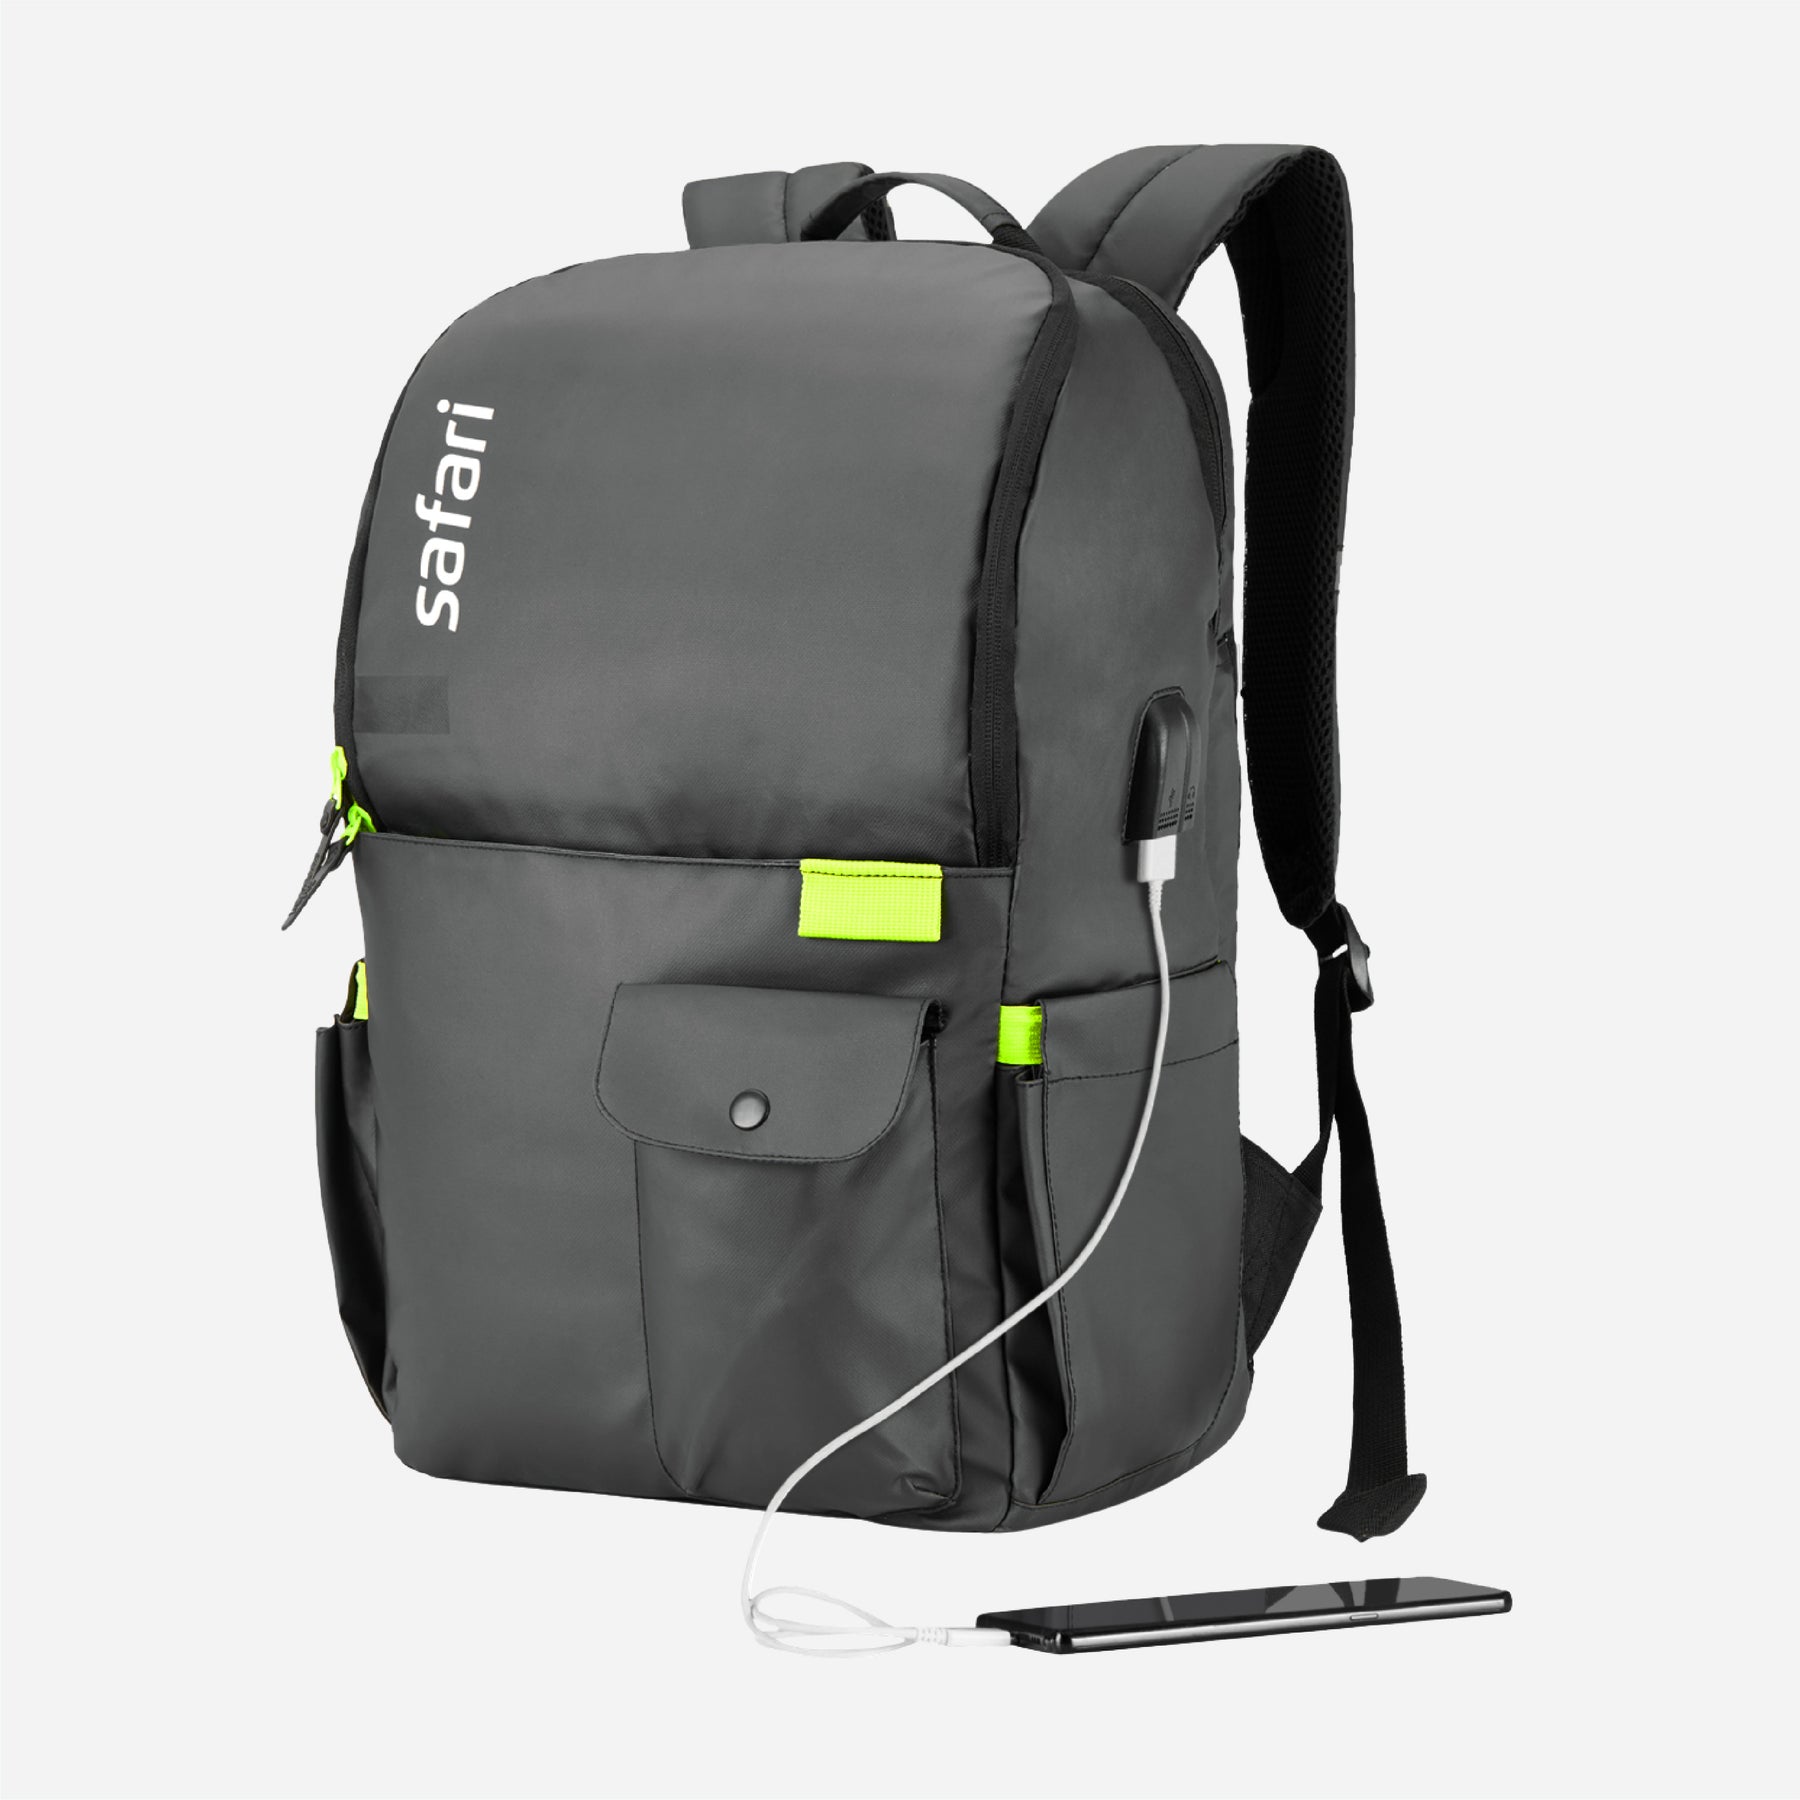 Safari Ultimo 23L Black Laptop Backpack with USB Port and Dust Resistant Fabric